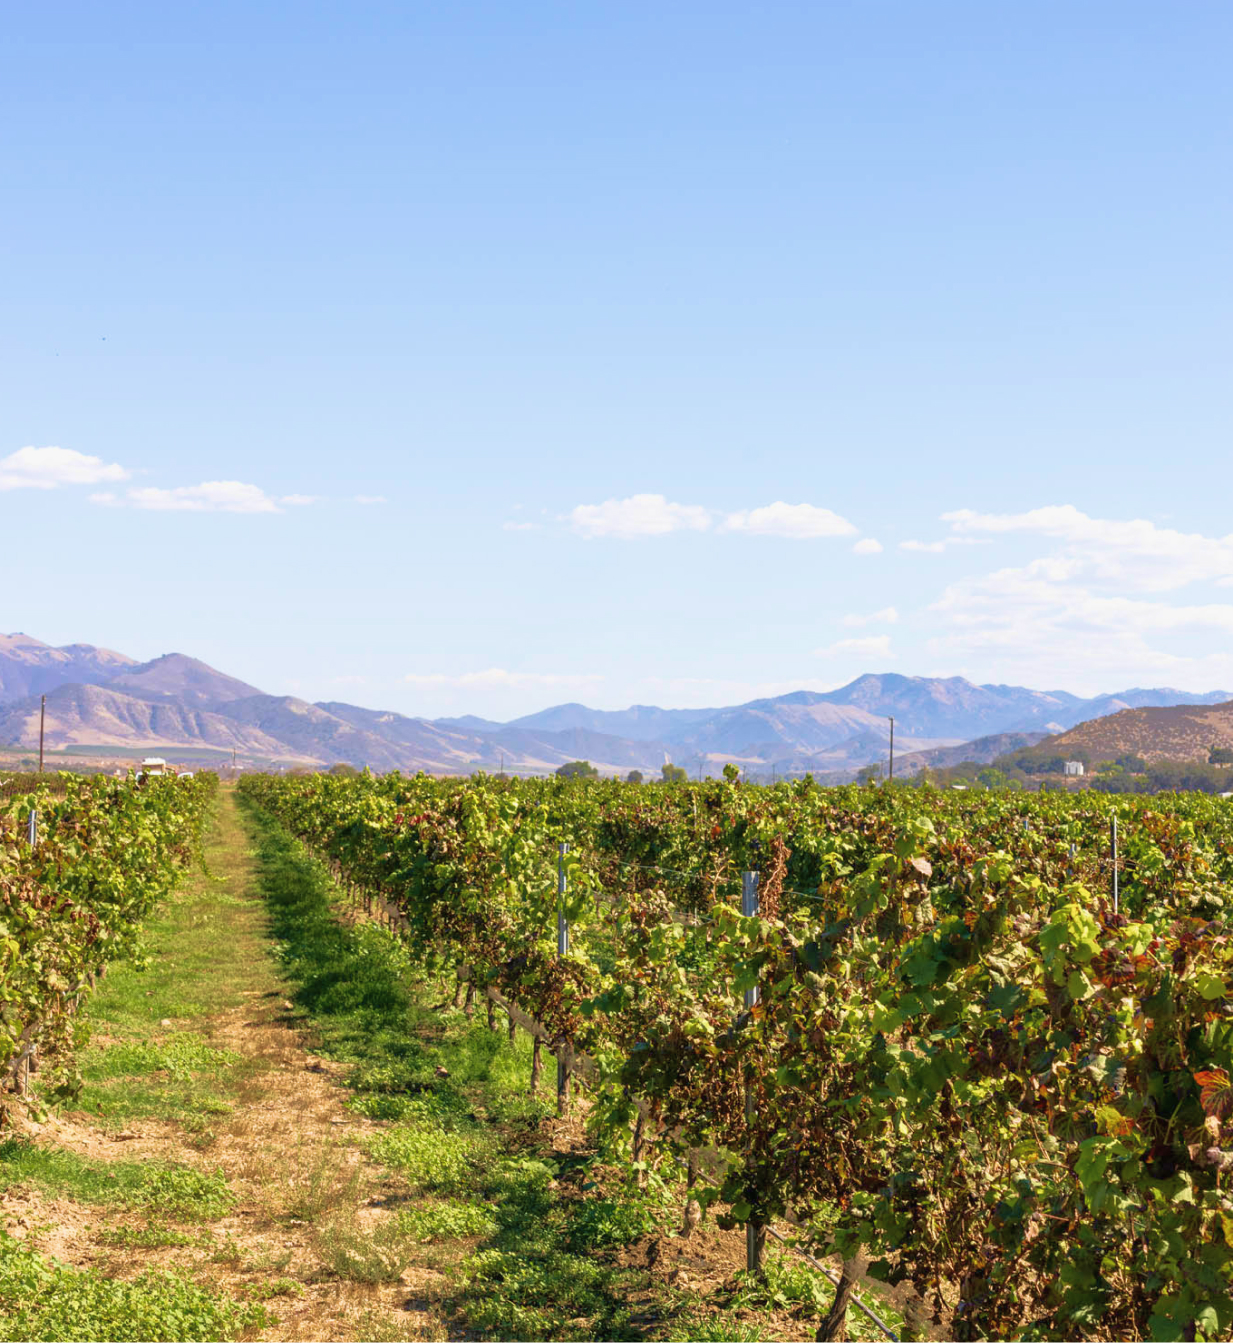 Blue Skys and mountains with beautiful grape fields